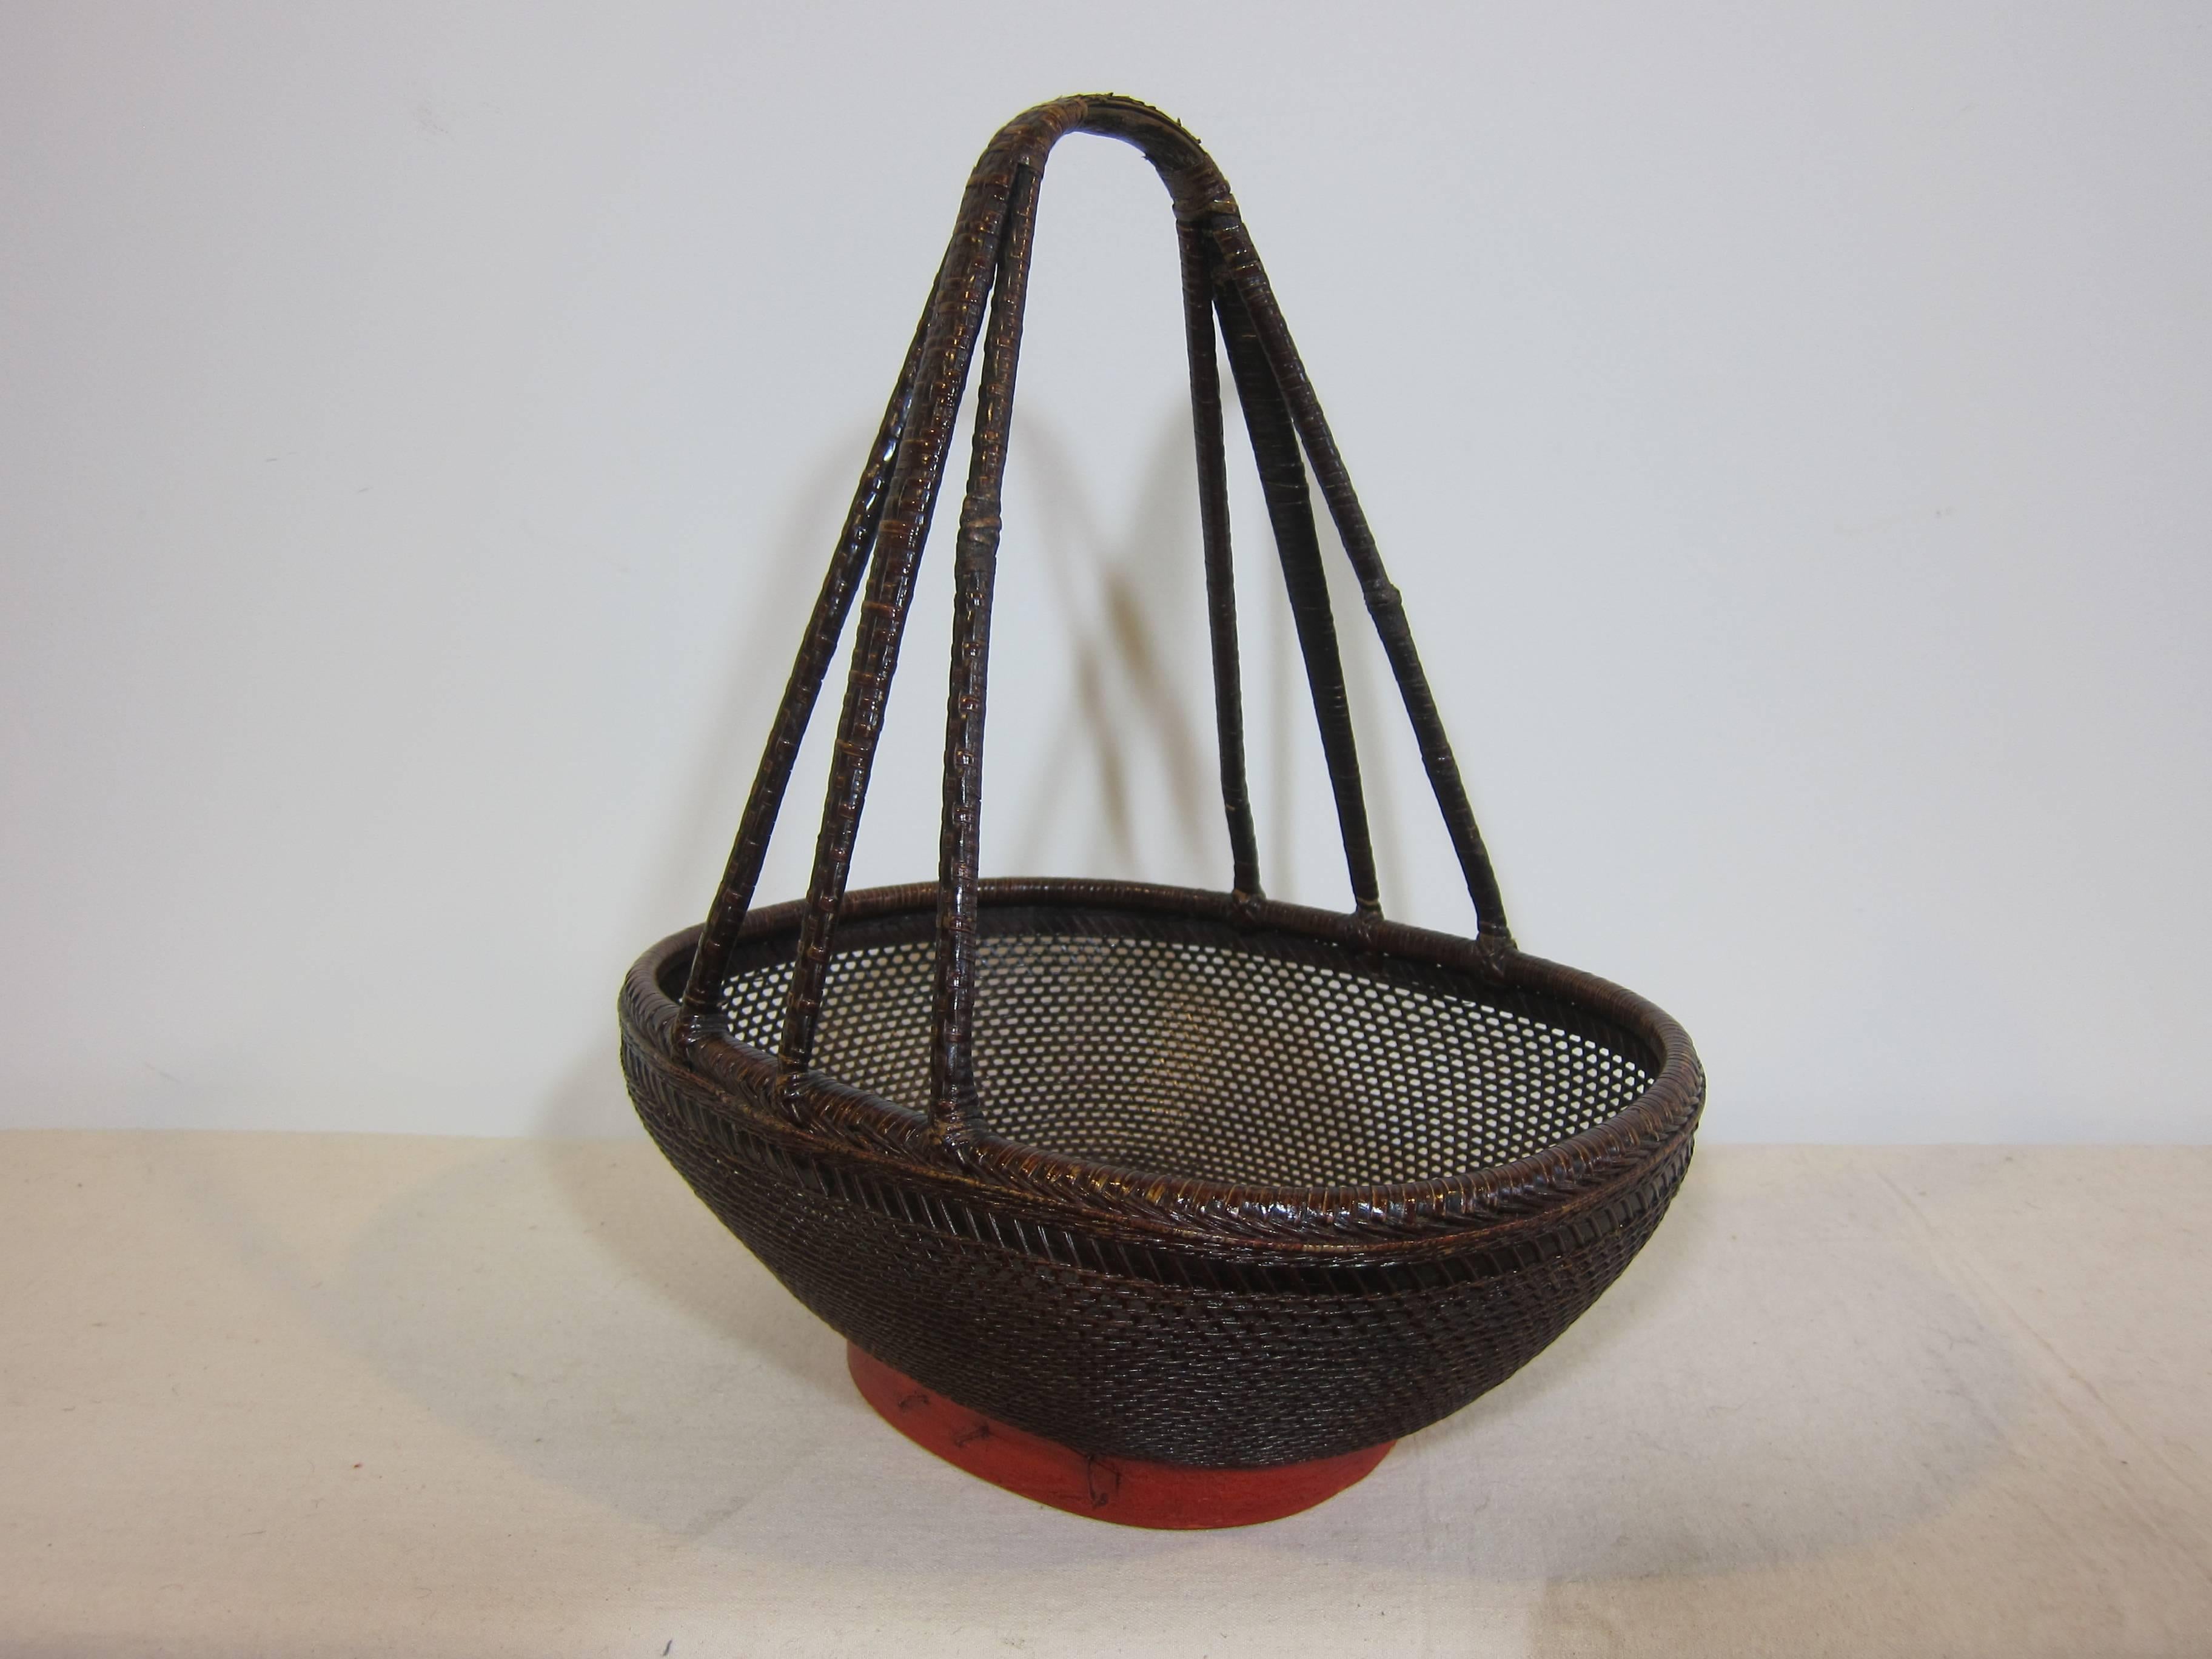 Antique market basket of woven reed, turned bamboo and wood. Decorative basket. This an actual market basket from the turn of the century 1900. In very good condition for collection and or use. Very intricate design with great attention to detail.